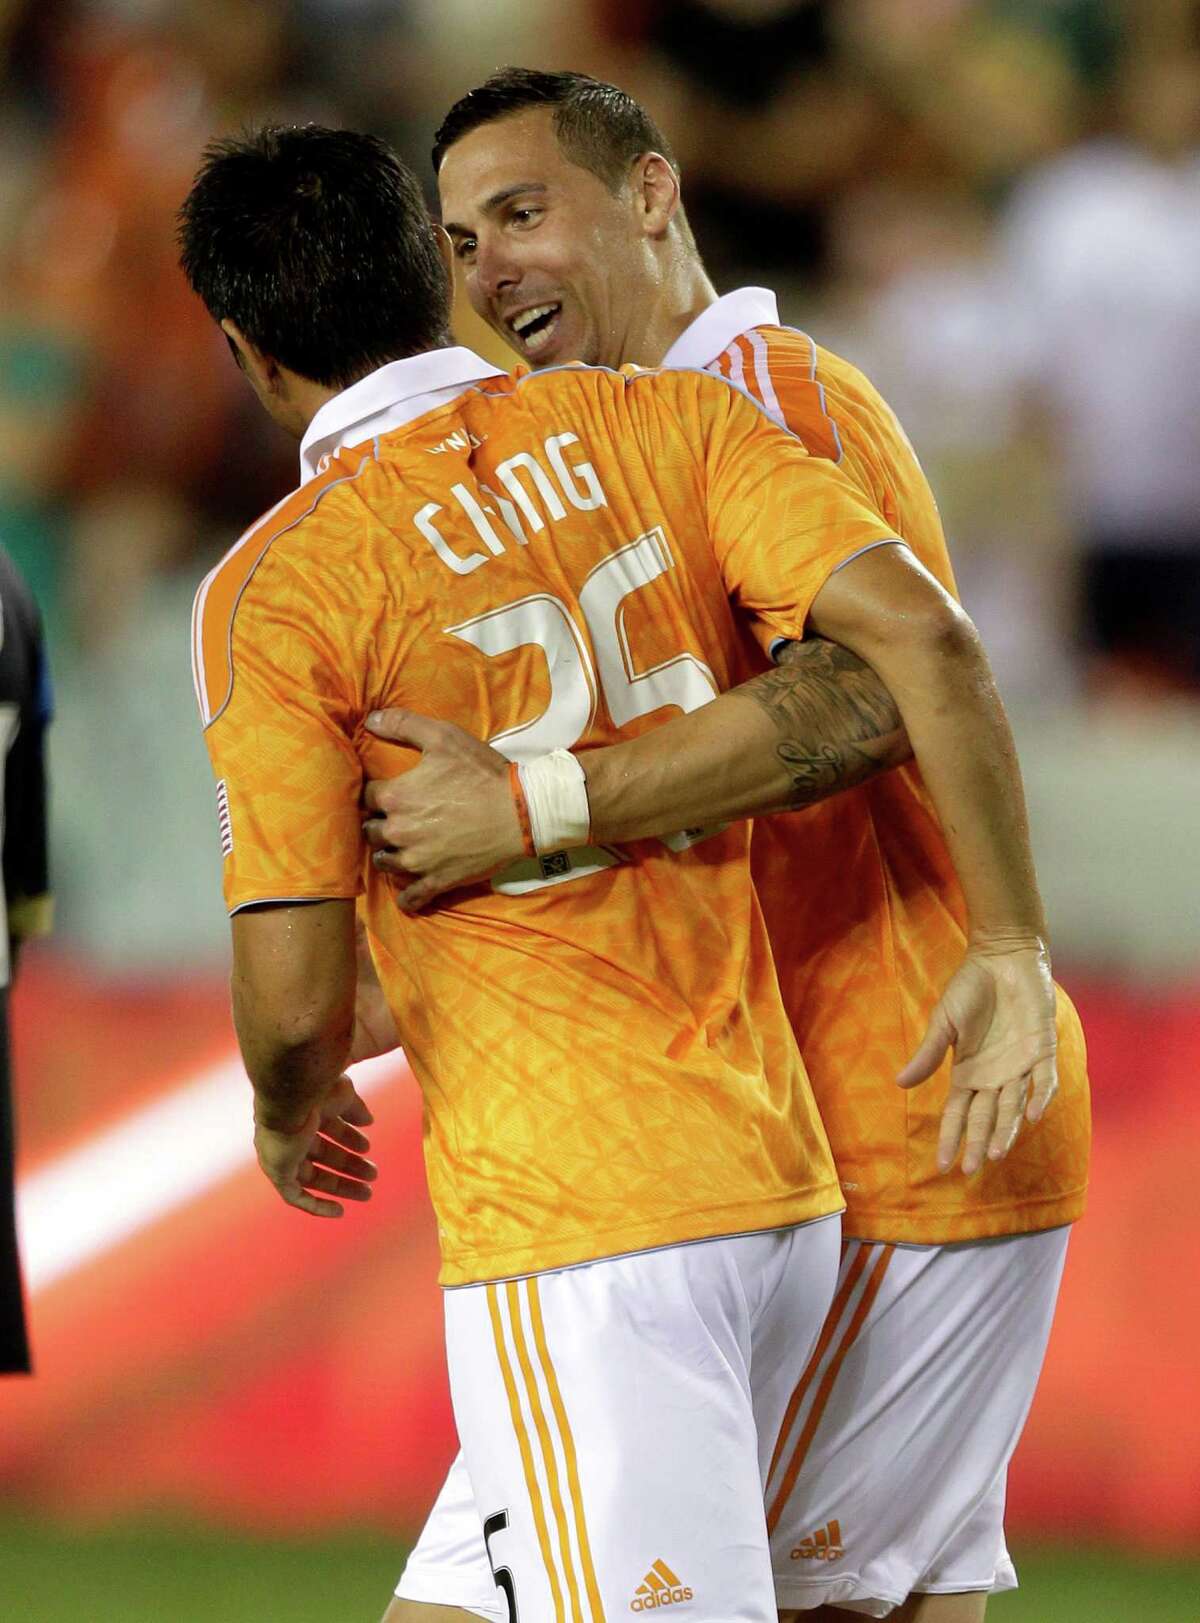 HOUSTON, TX - JUNE 30: Brian Ching #25 of the Houston Dynamo is congratulated by Geoff Cameron #20 of the Houston Dynamo after scoring on a penalty kick in the 83rd minute against the Philadelphia Union at BBVA Compass Stadium on June 30, 2012 in Houston, Texas.